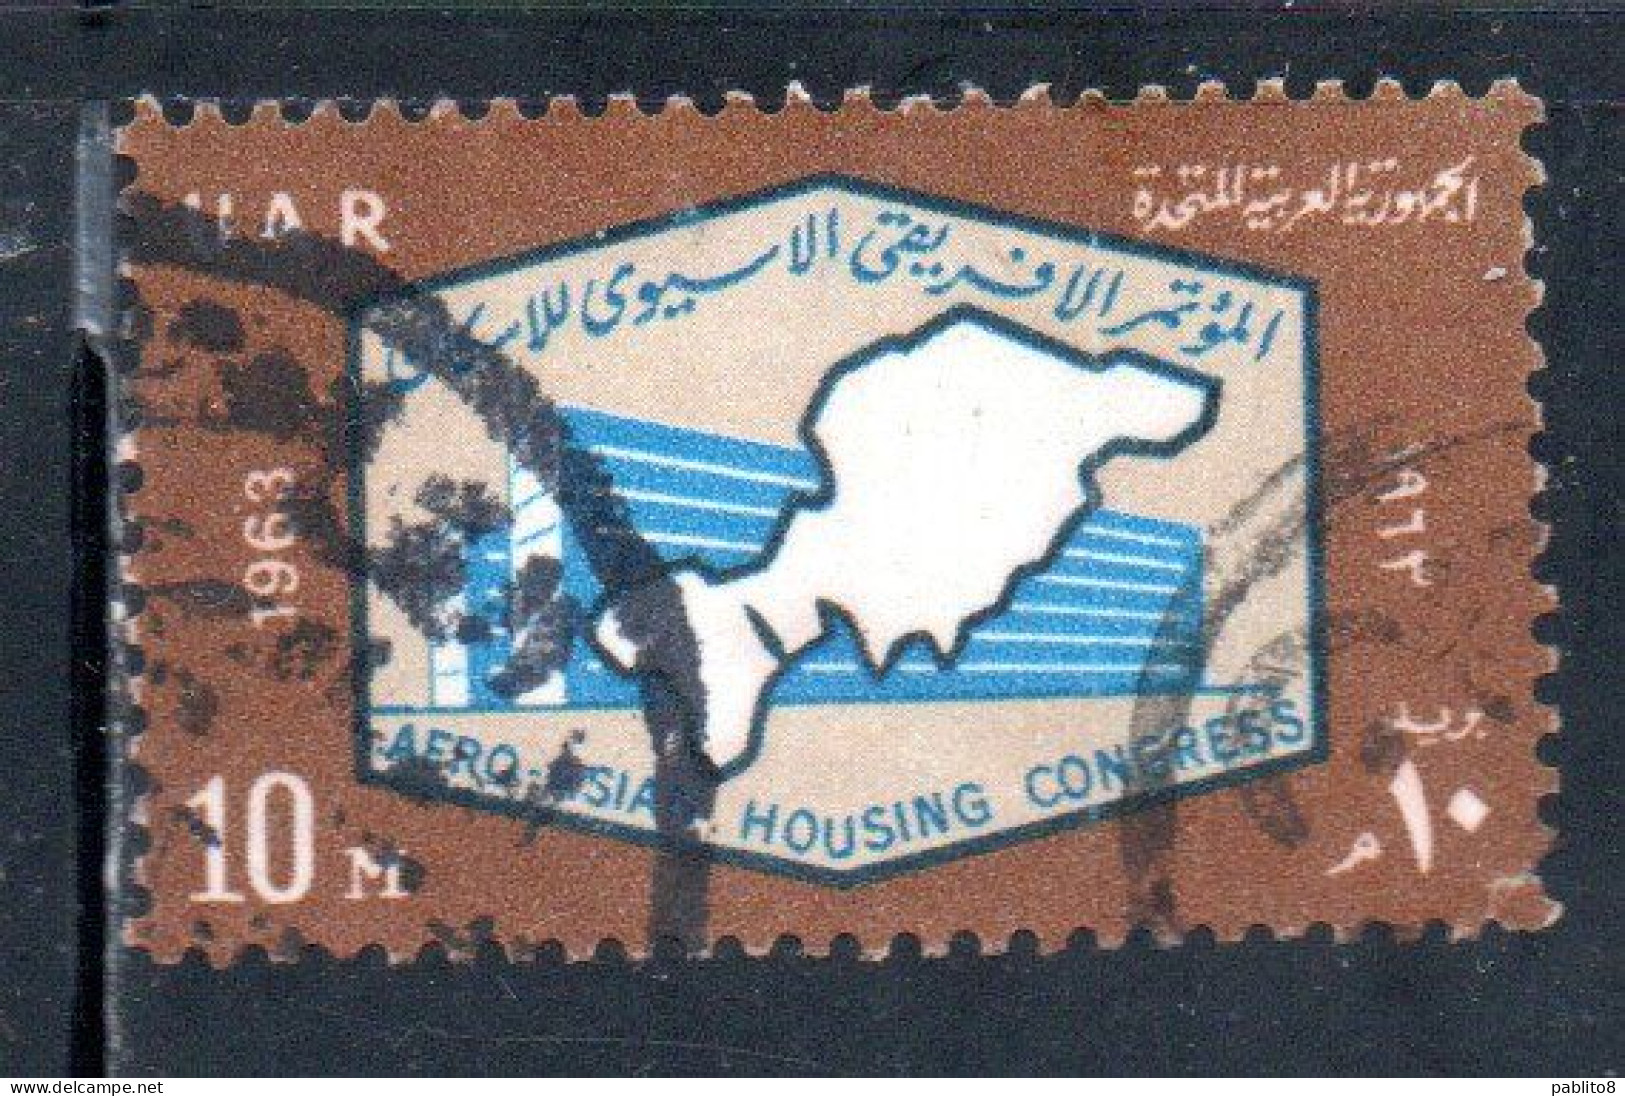 UAR EGYPT EGITTO 1963 AFRO-ASIAN HOUSING CONGRESS MODERN BUILDING AND MAP 10m  USED USATO OBLITERE' - Used Stamps